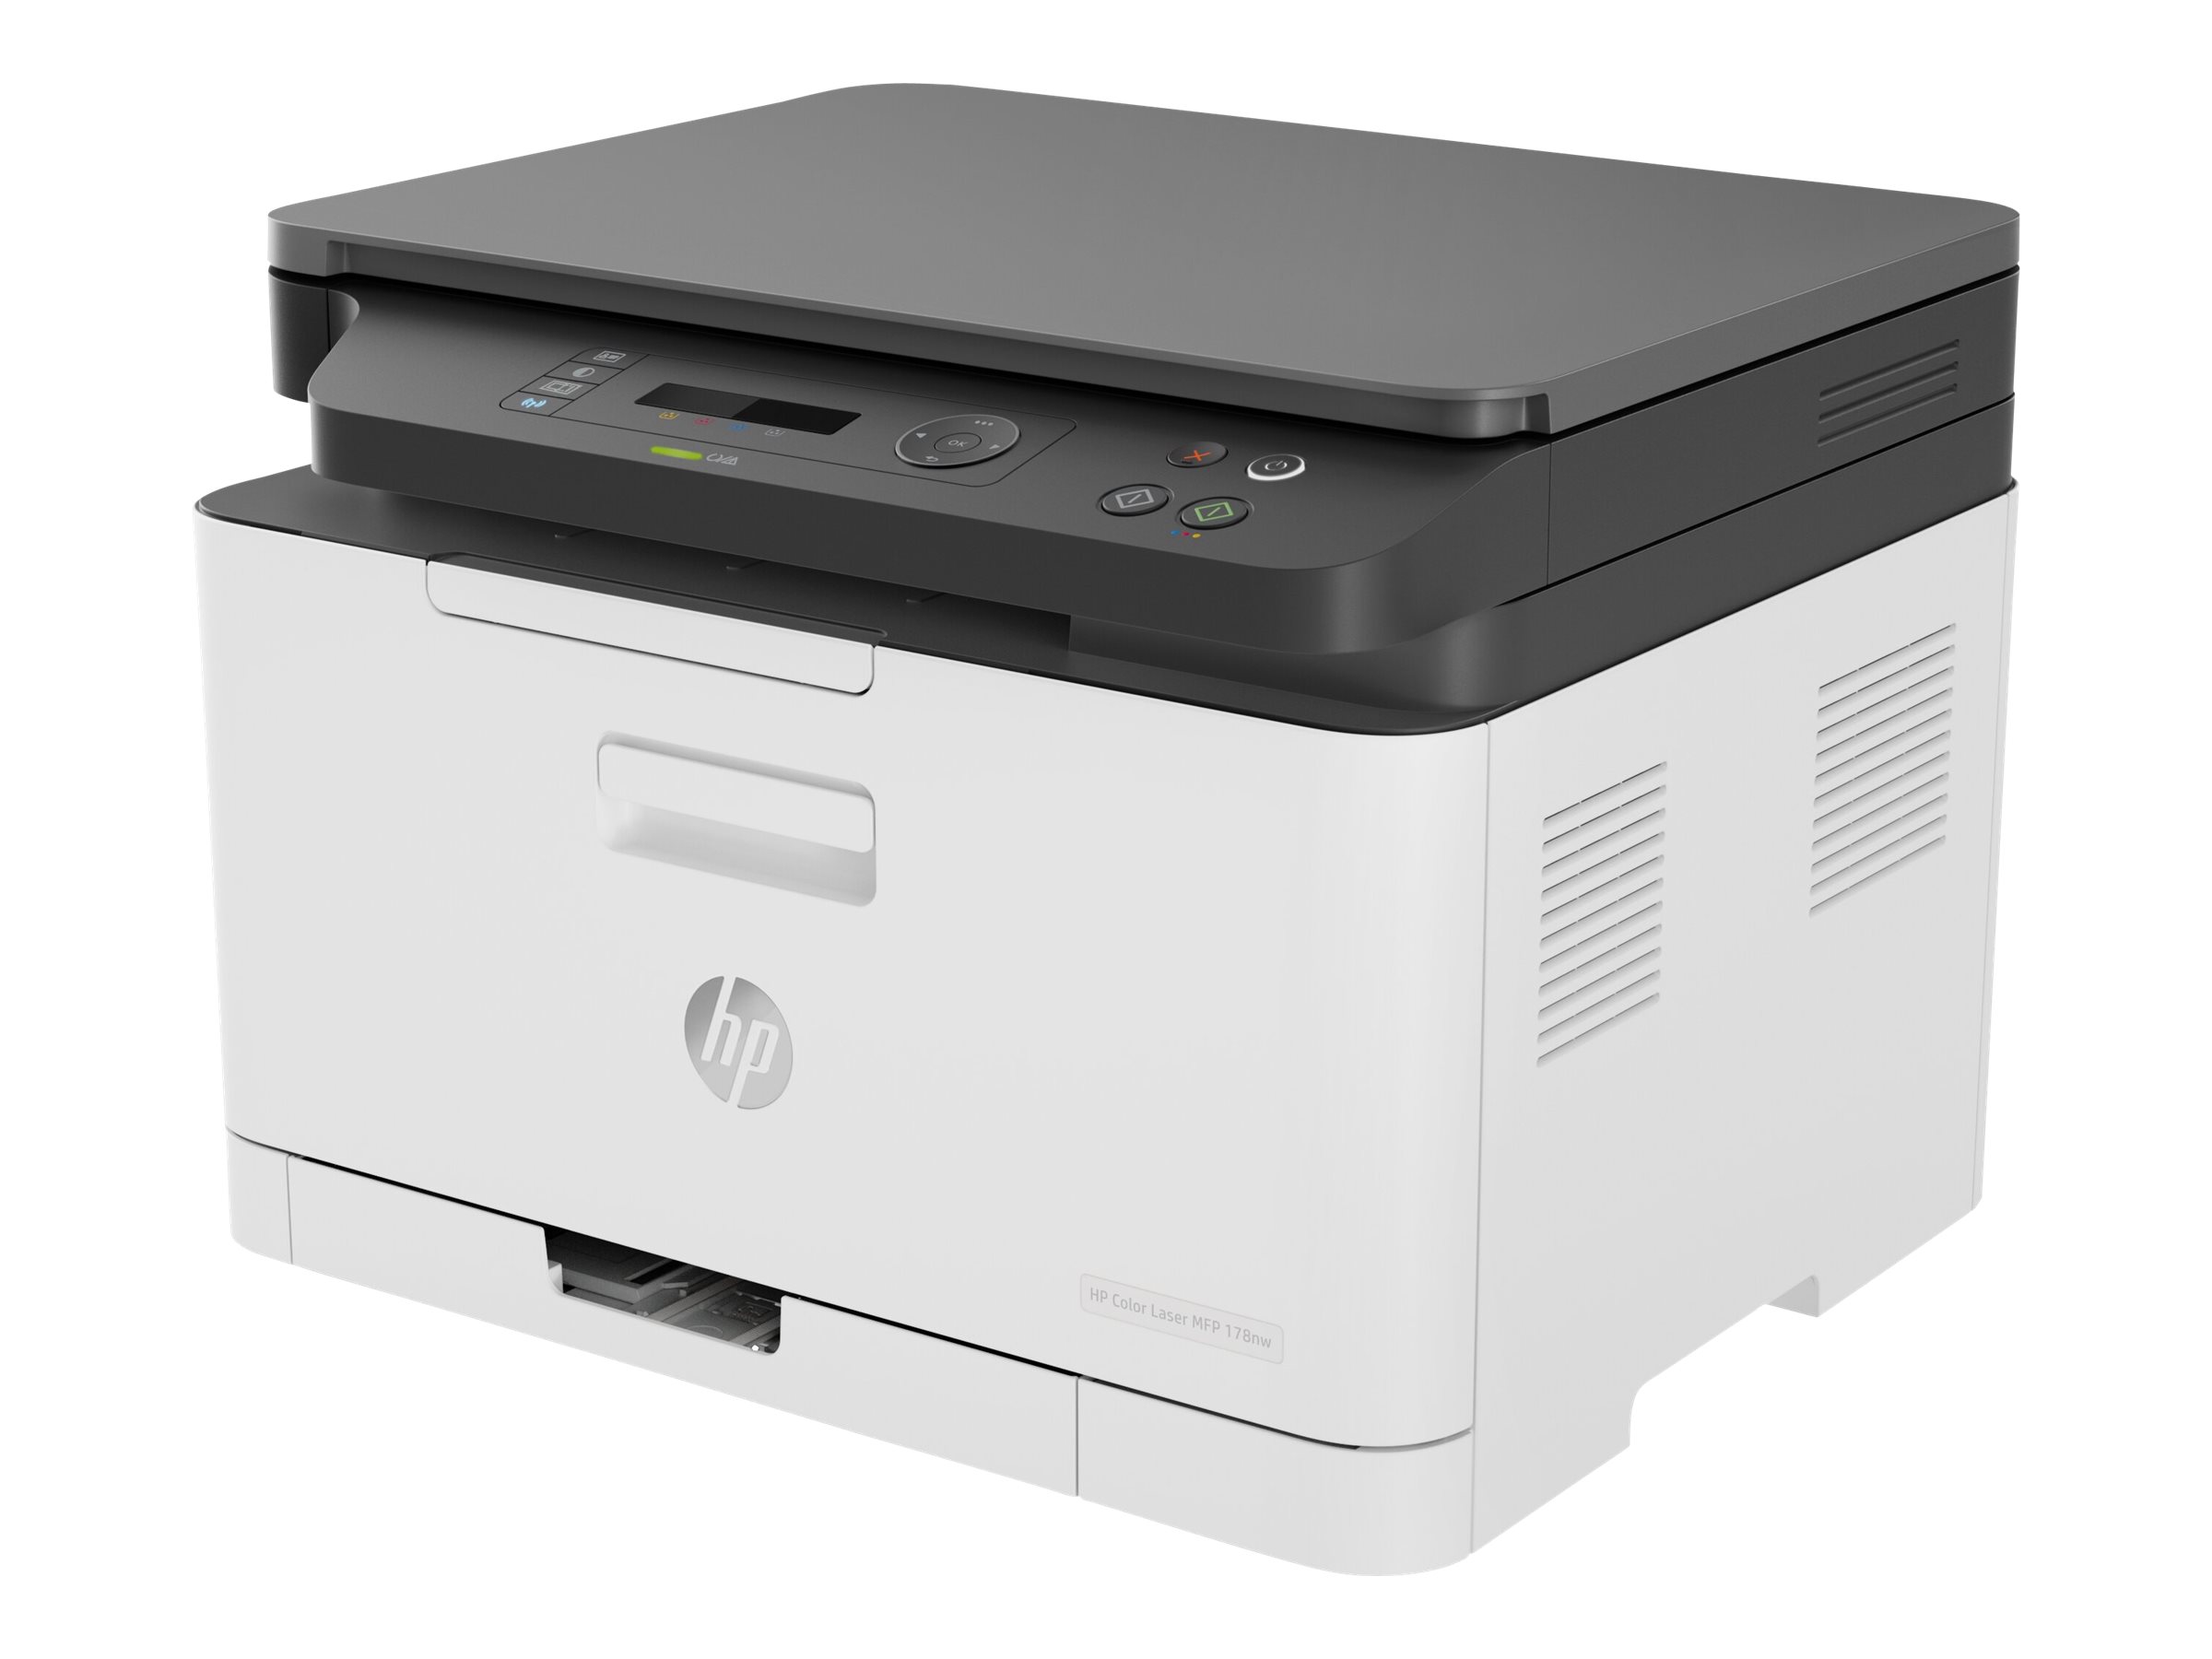 HP Color Laser MFP 178nw - Multifunktionsdrucker - Farbe - Laser - Legal (216 x 356 mm)/A4 (210 x 297 mm) (Original) - A4/Legal 